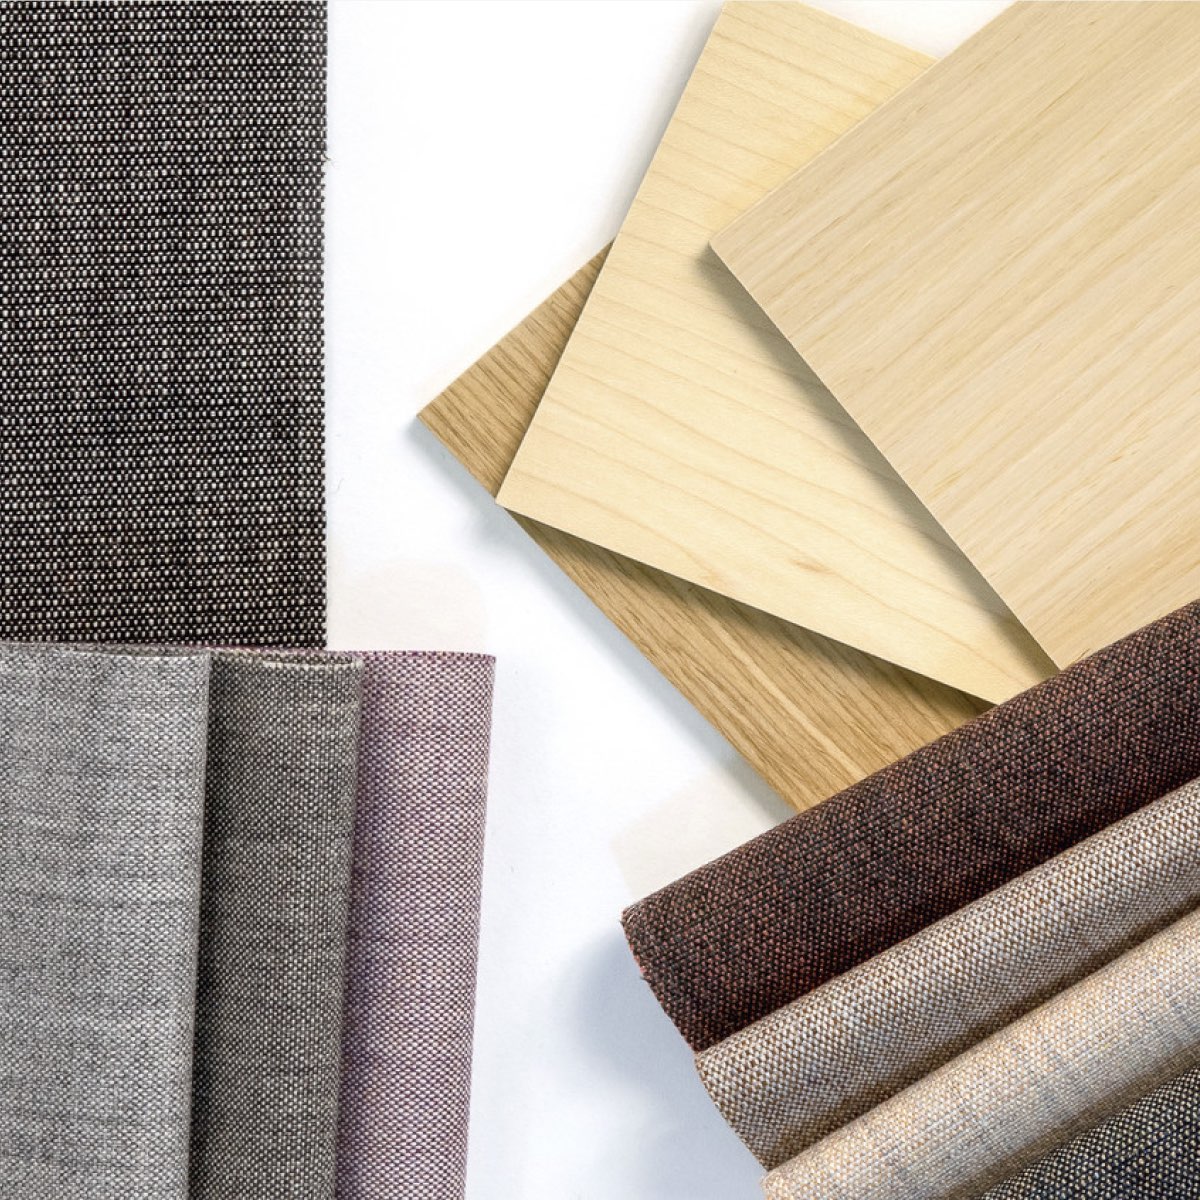 An overhead view of a variety of material samples including fabrics, and laminates in a range of colors.